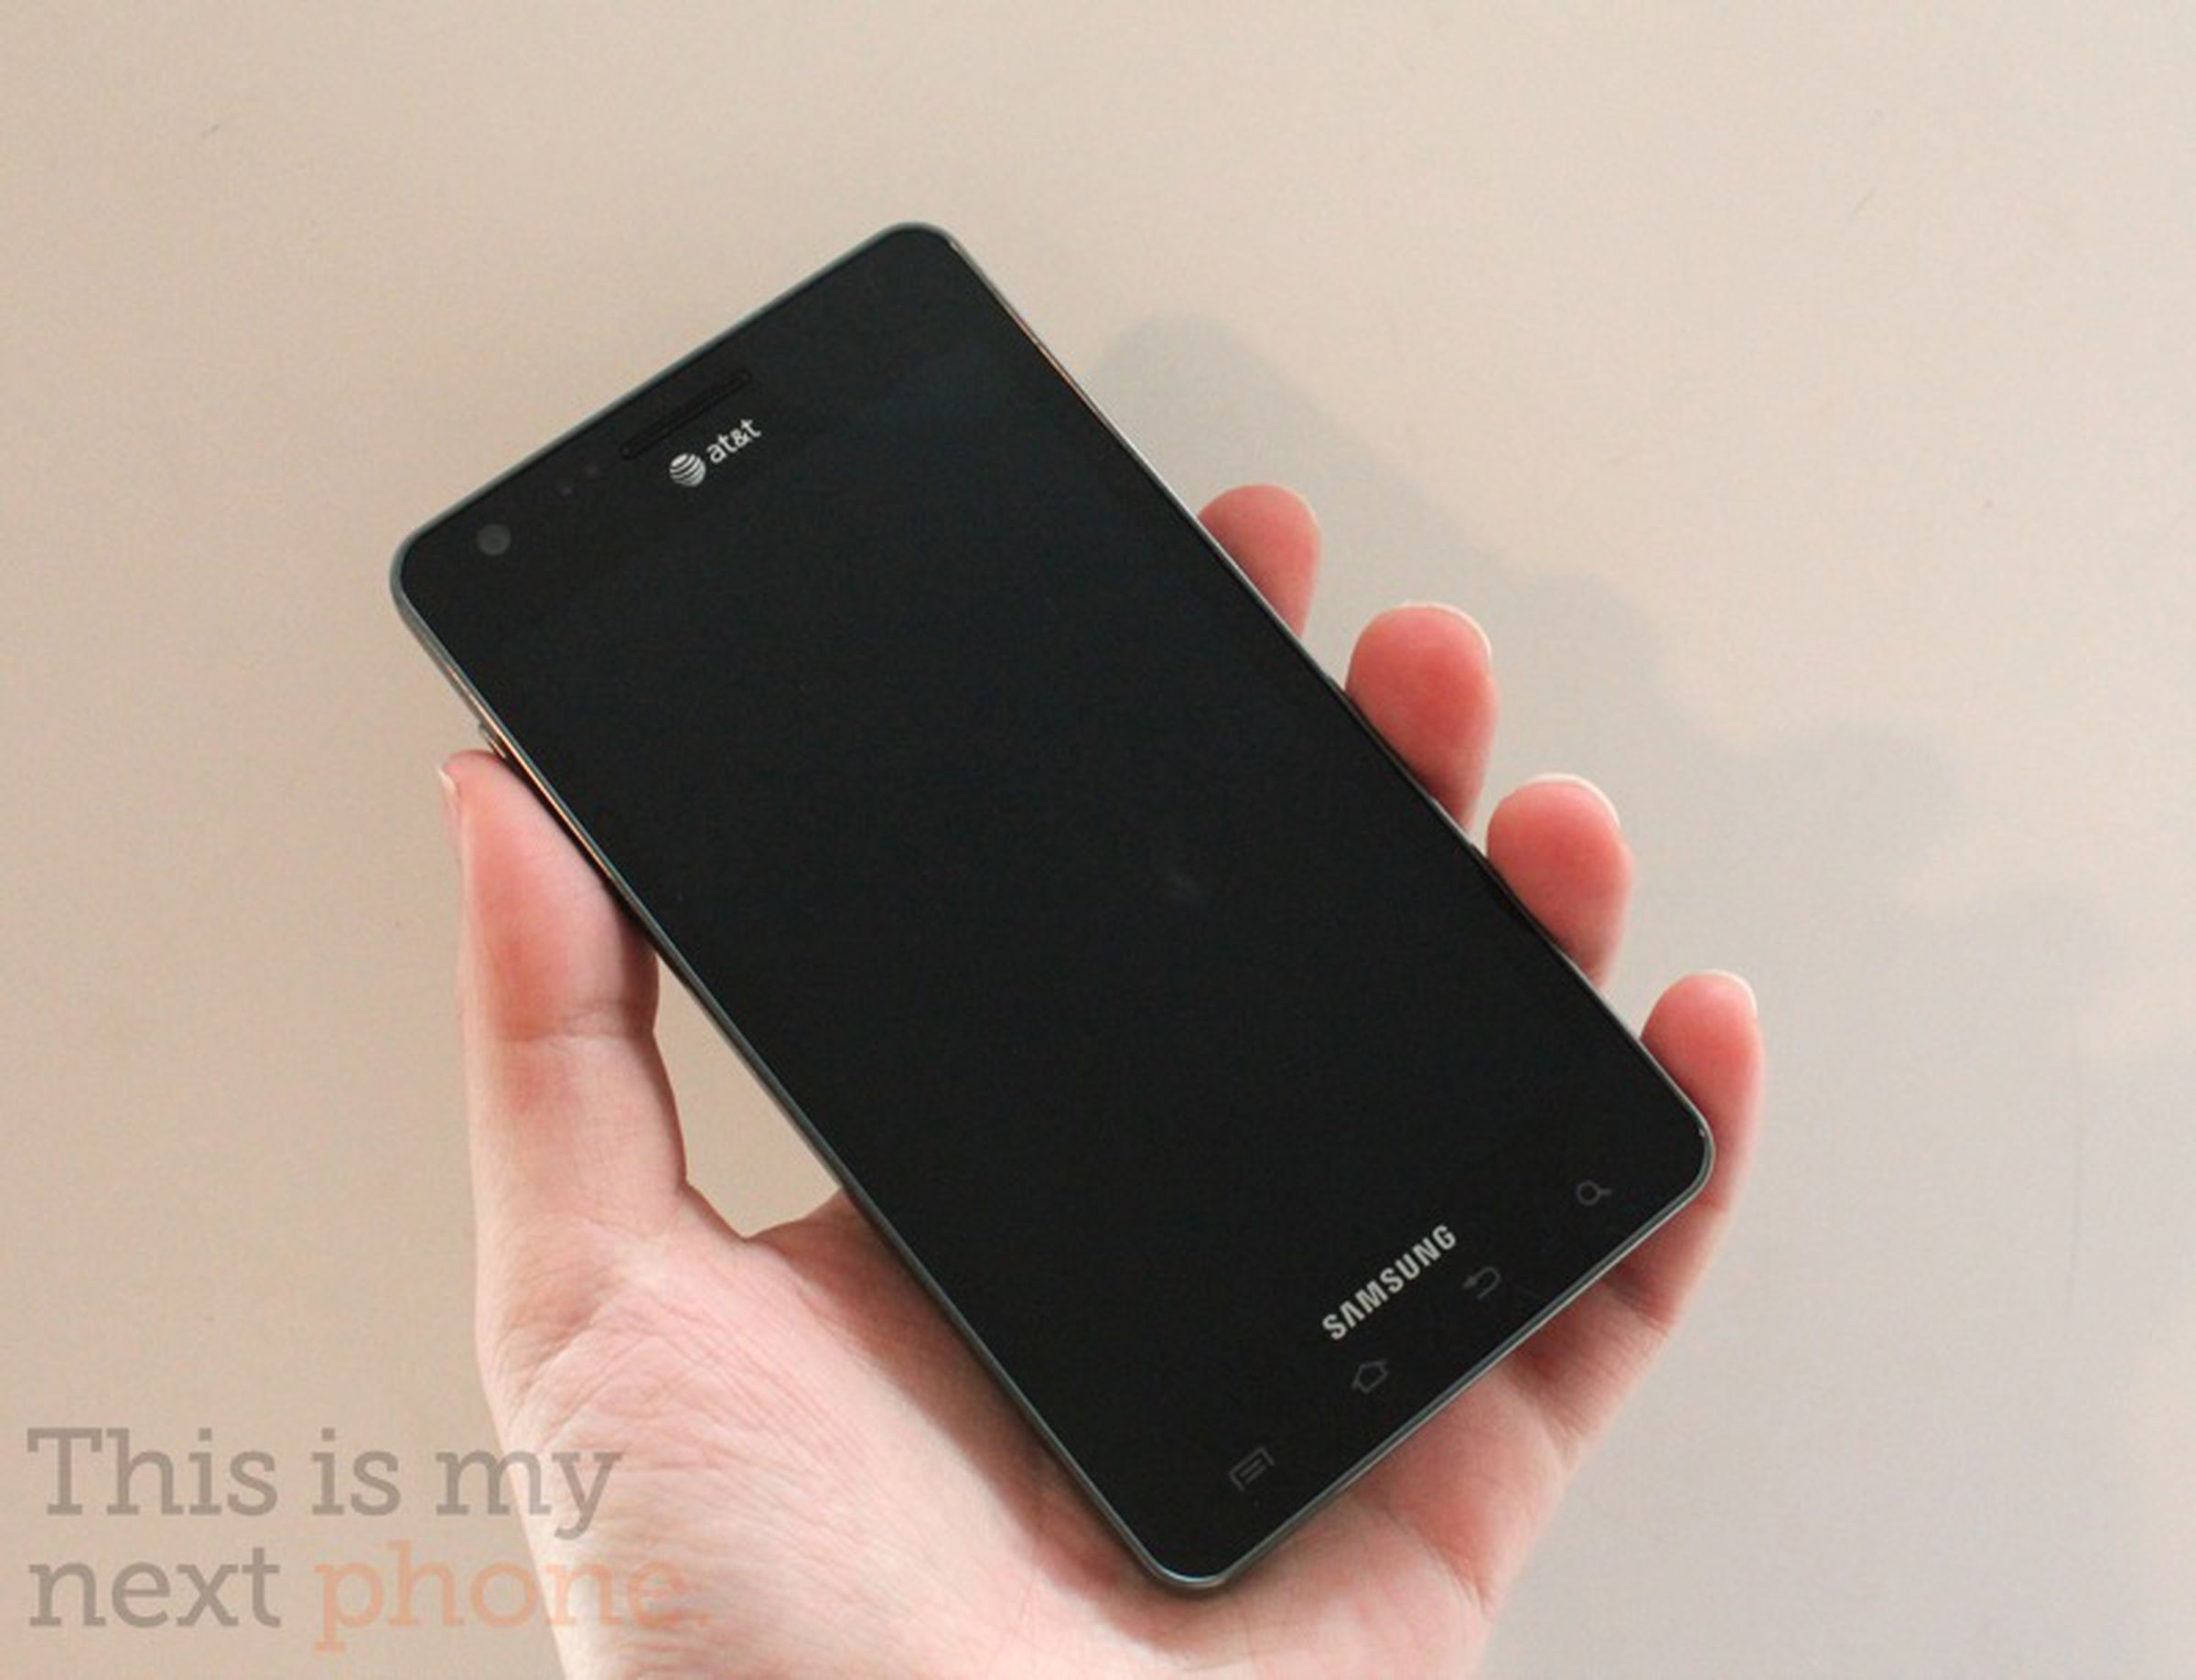 Samsung Infuse 4G review pictures